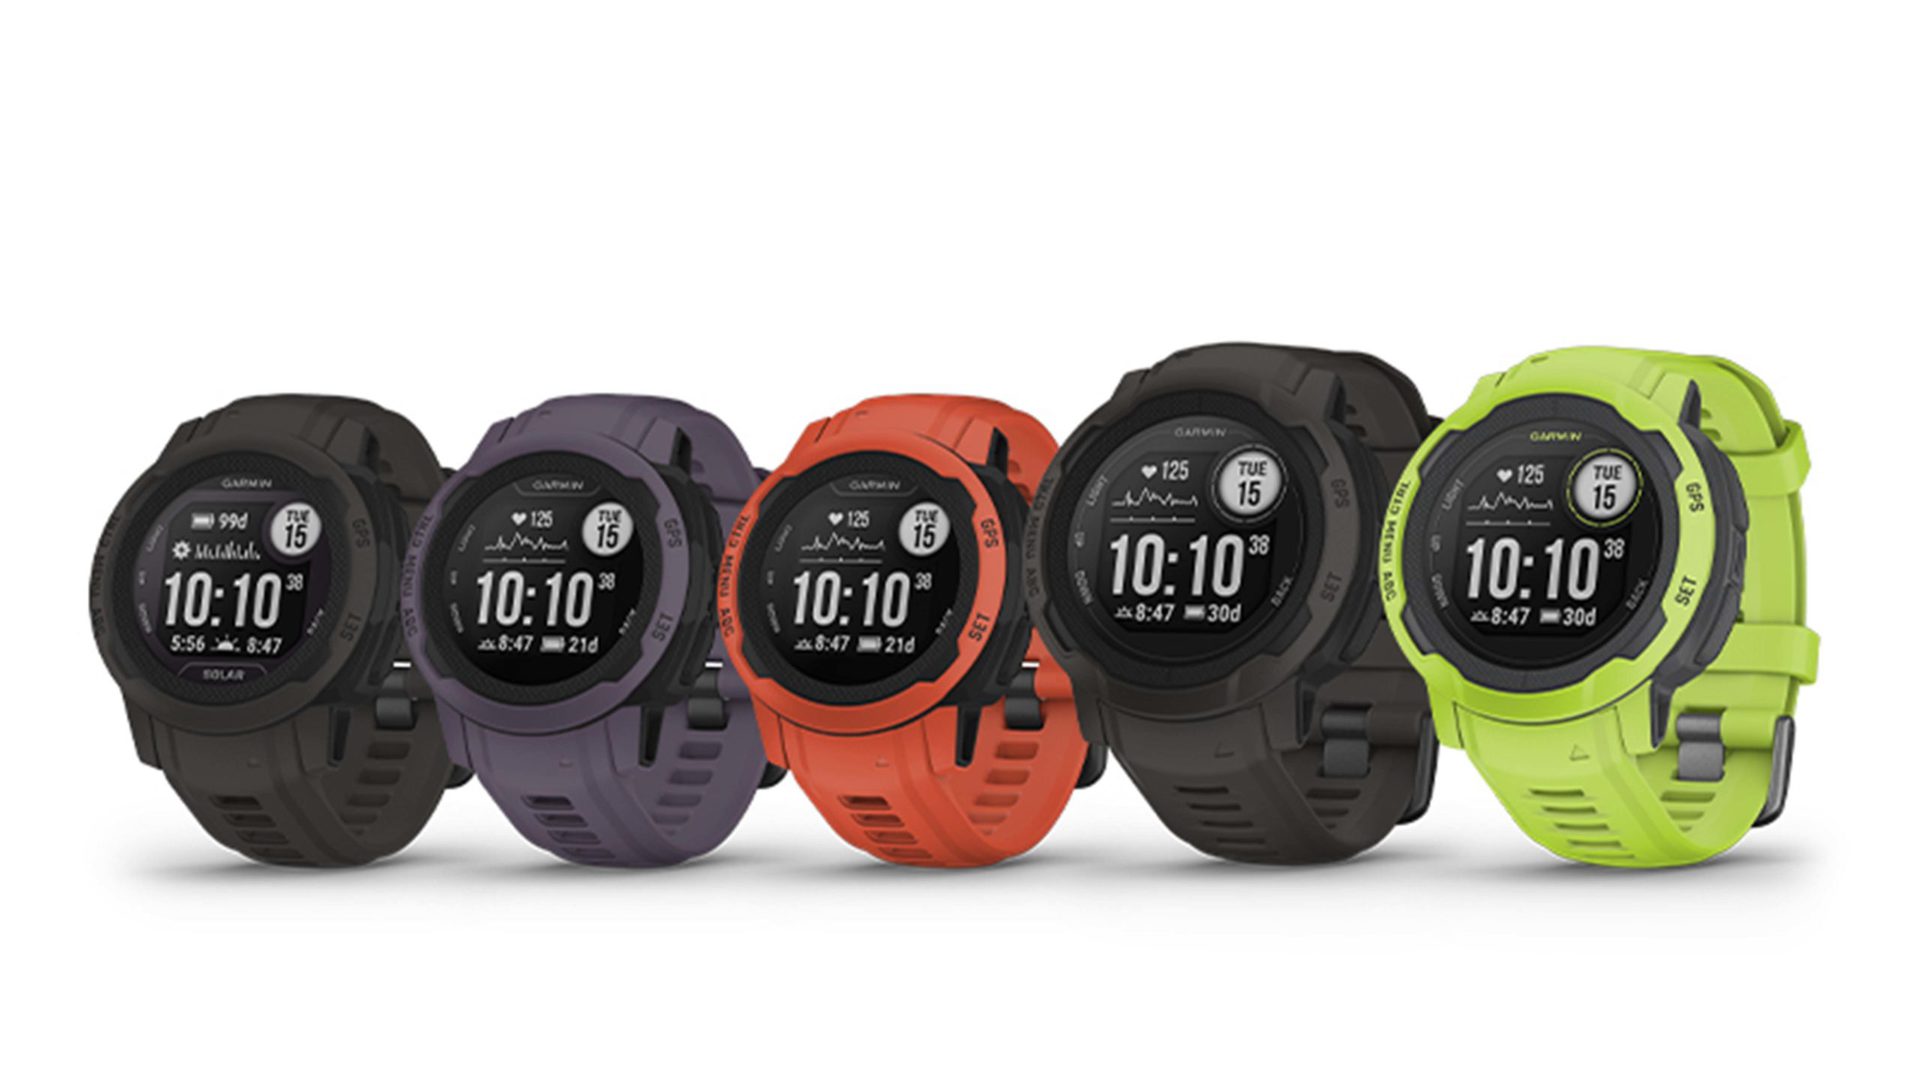 A product image depicts the Garmin Instinct 2 series standard edition devices including both the 2 and 2S sizes.